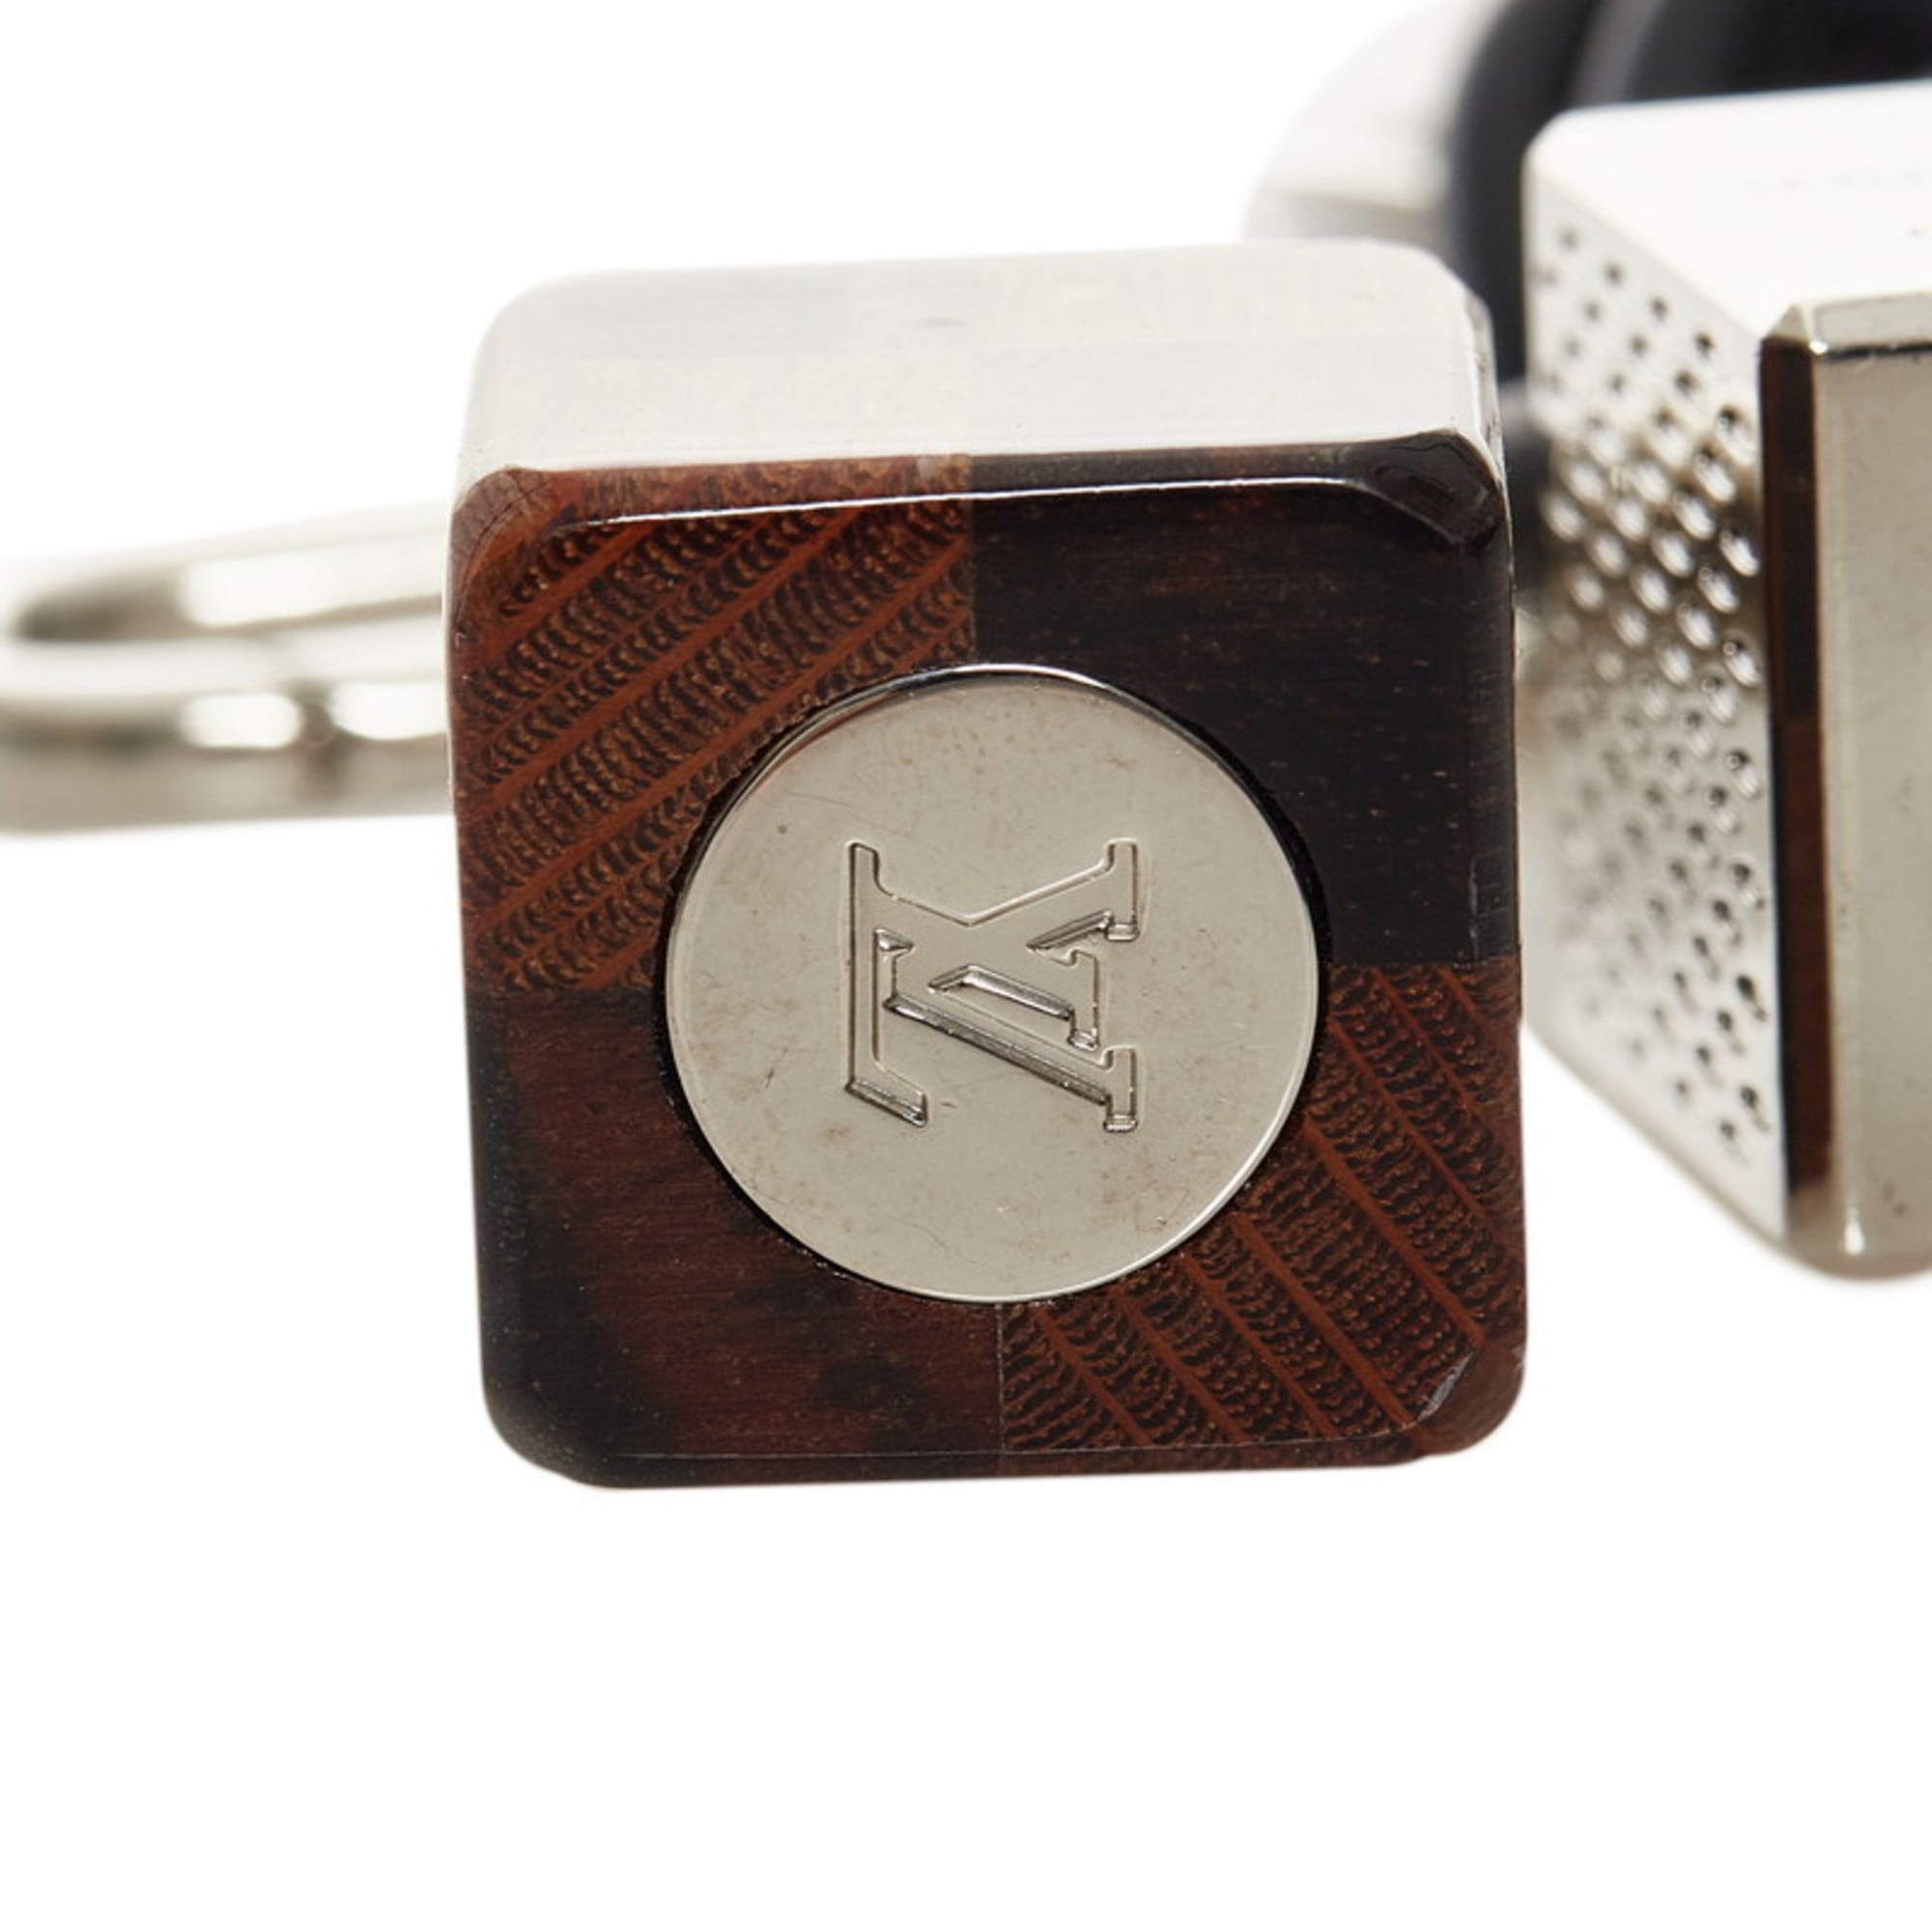 Authenticated used Louis Vuitton Damier Cube Keychain Keyring M61008 Silver Brown Metal Leather Wood Women's Louis Vuitton, Adult Unisex, Size: (HxWxD